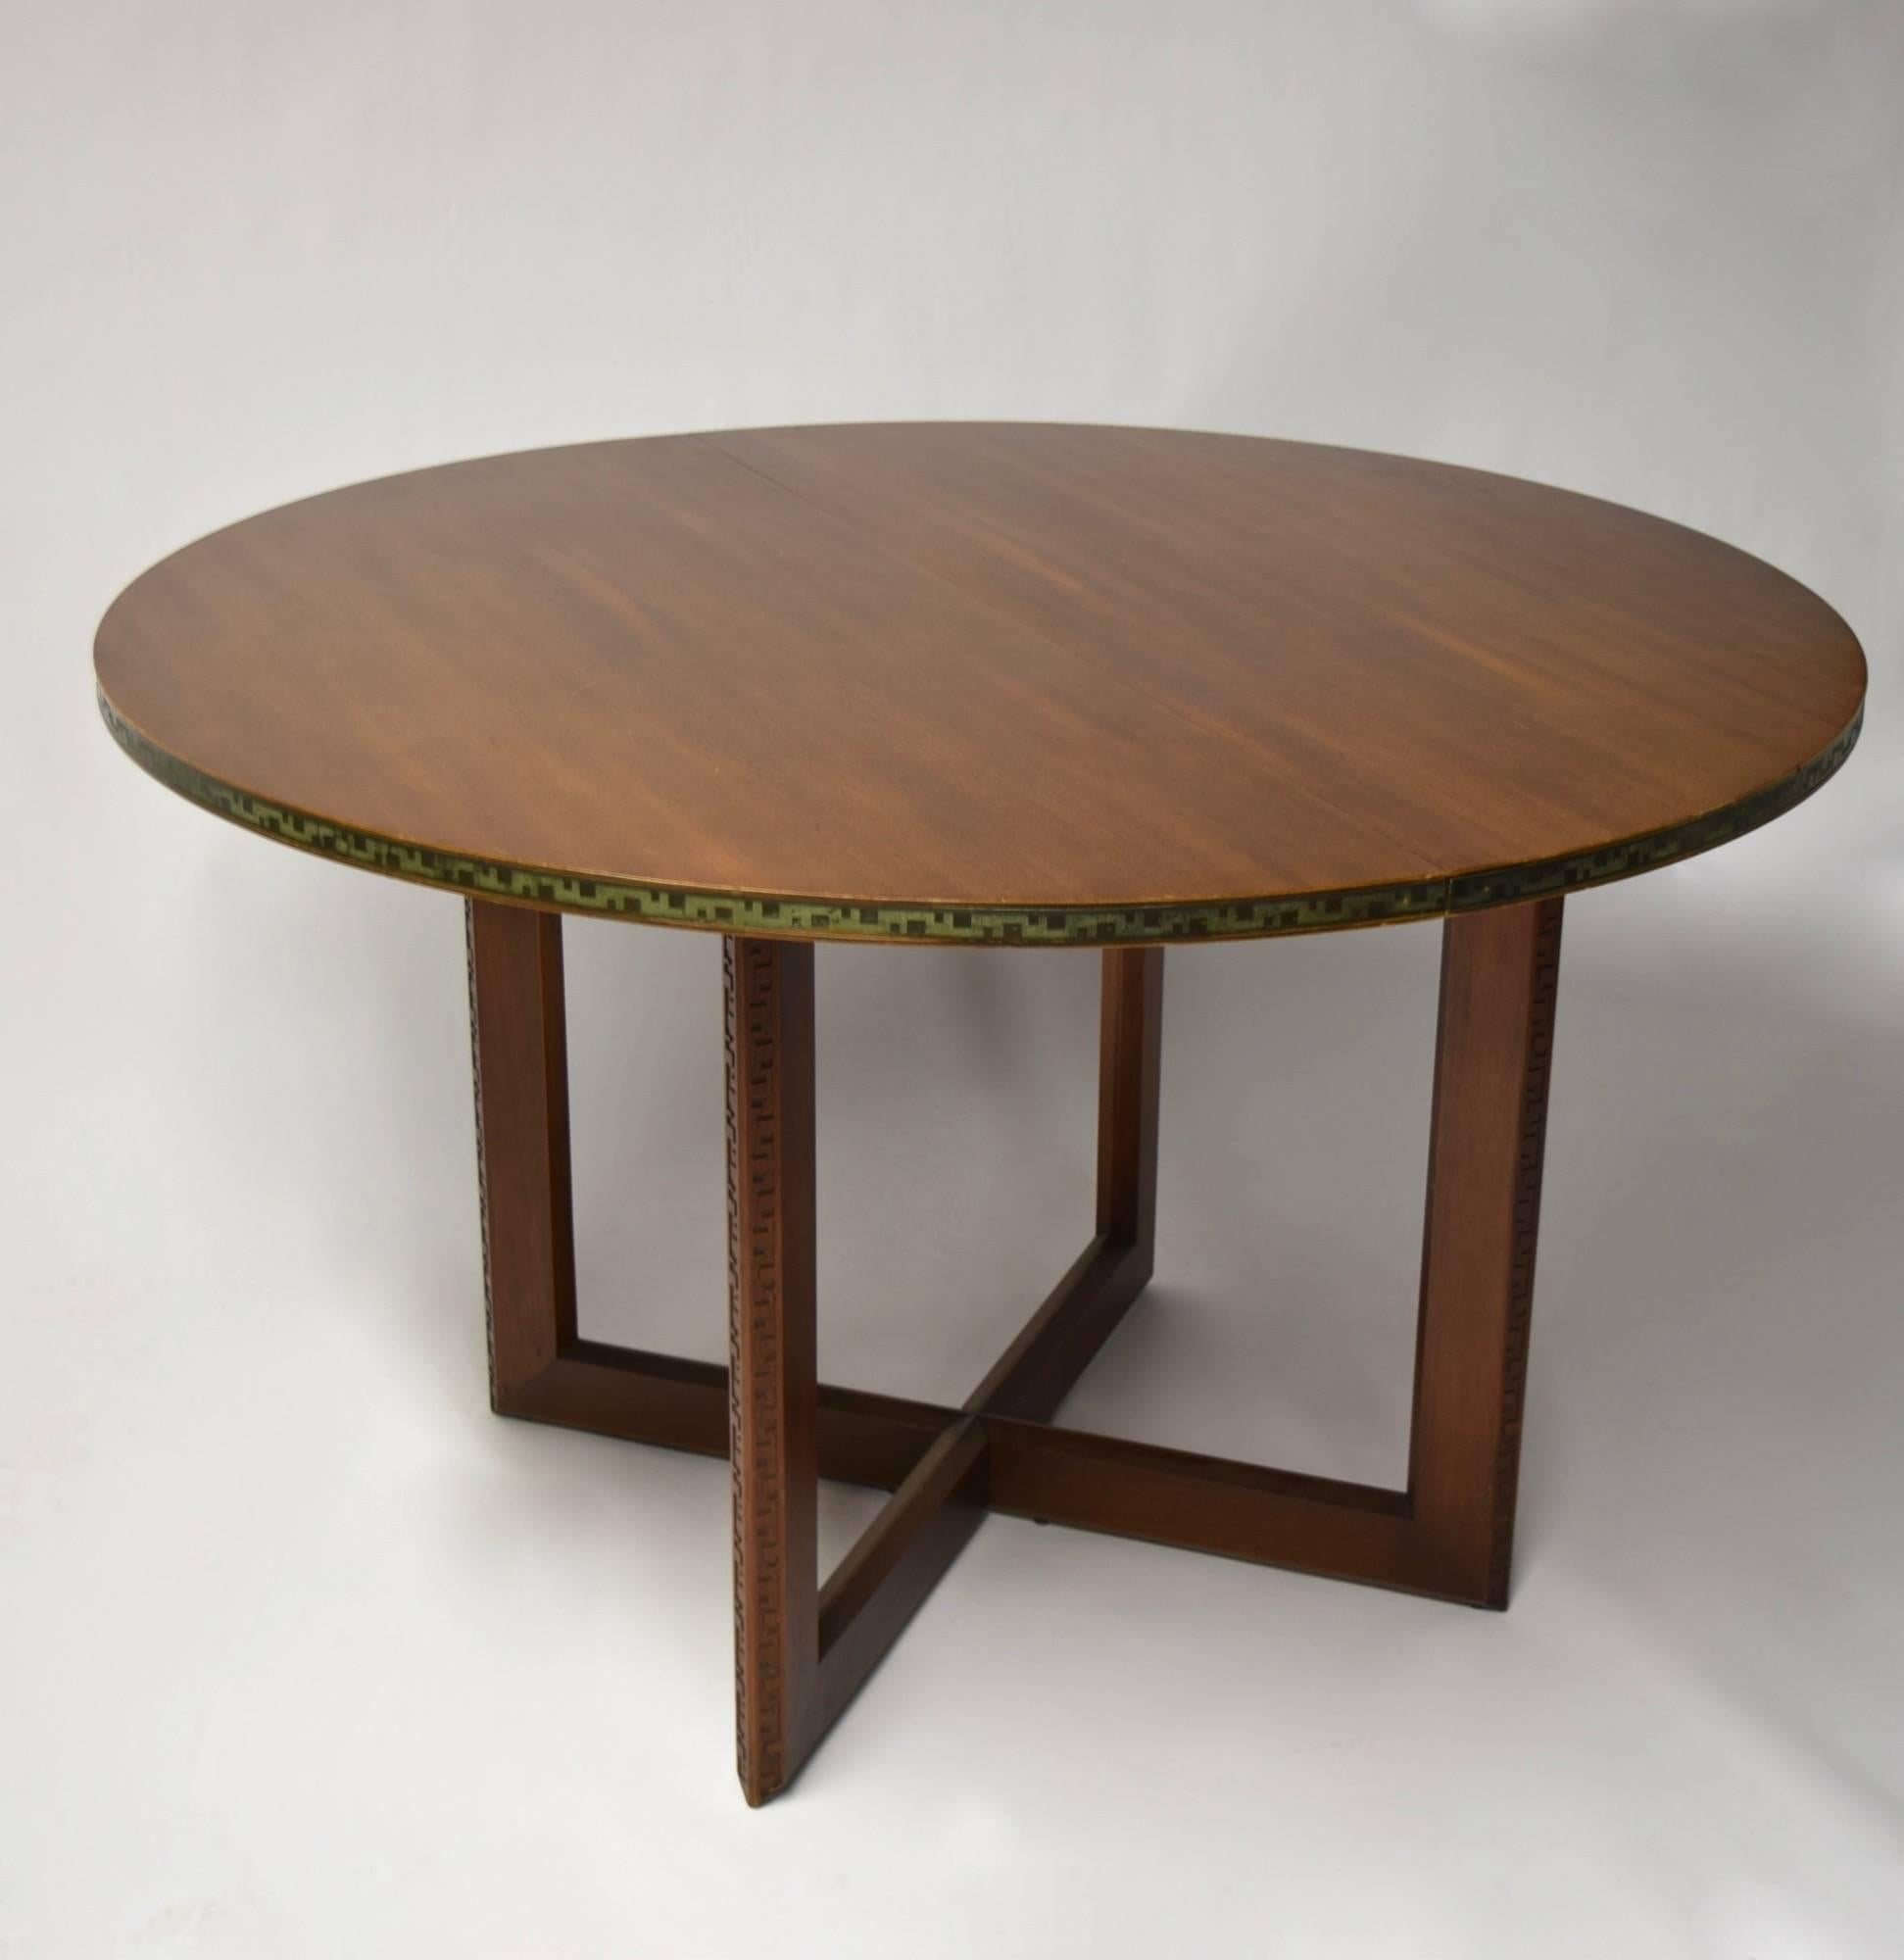 Frank Lloyd Wright for Heritage-Henredon Taliesin dining set comprises a round, extendable dining table and eight dining chairs; two armchairs and six side. The table has an embossed copper banding with great patina along its circumference and